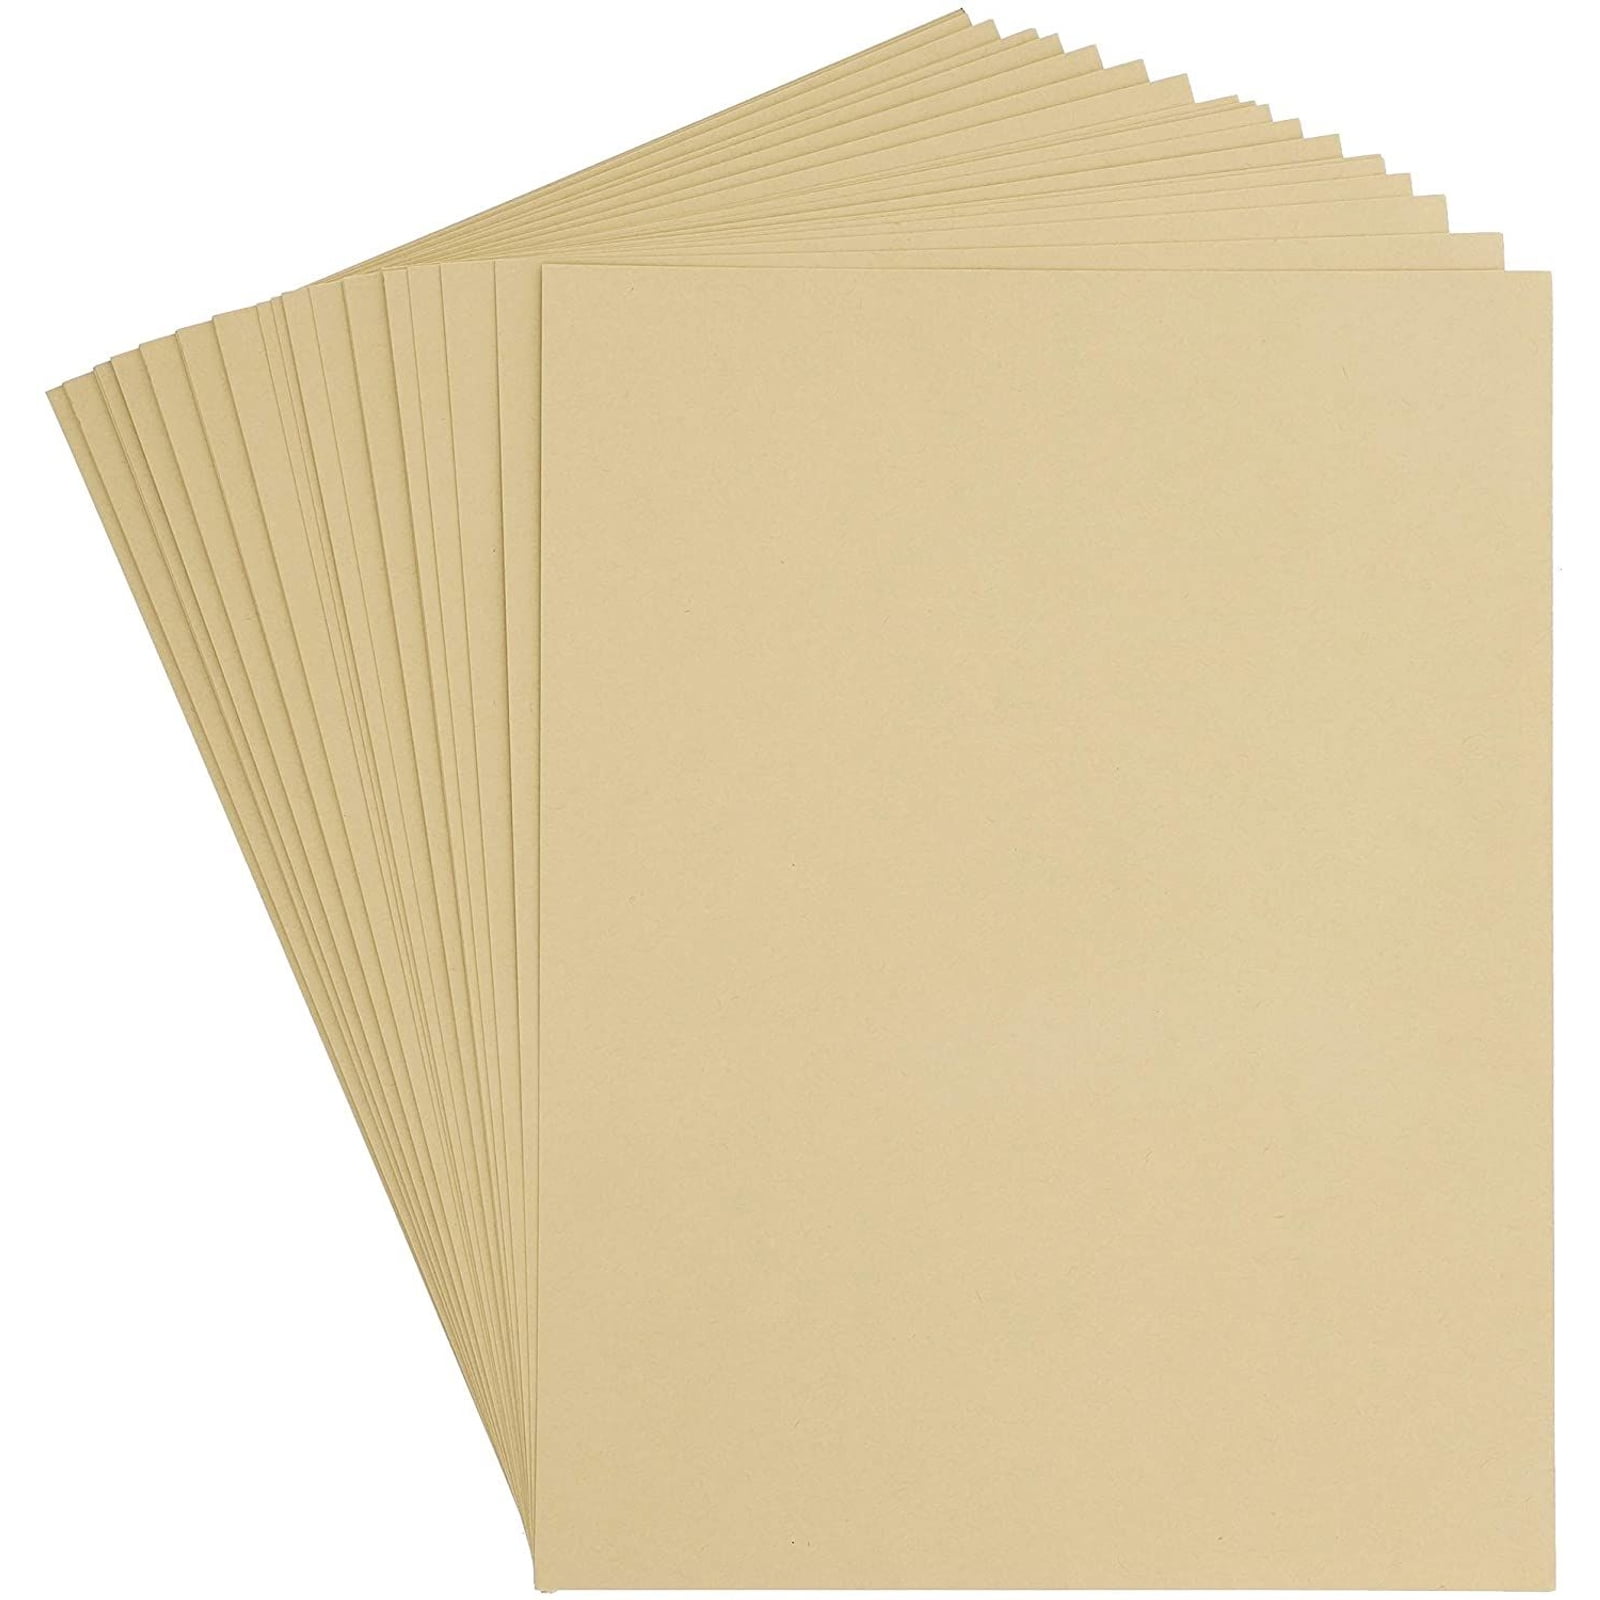 A4 50 SHEET CARD PACK IN 25 DIFFERENT COLOURS 170GM PRINTER FRIENDLY CARDS CRAFT 